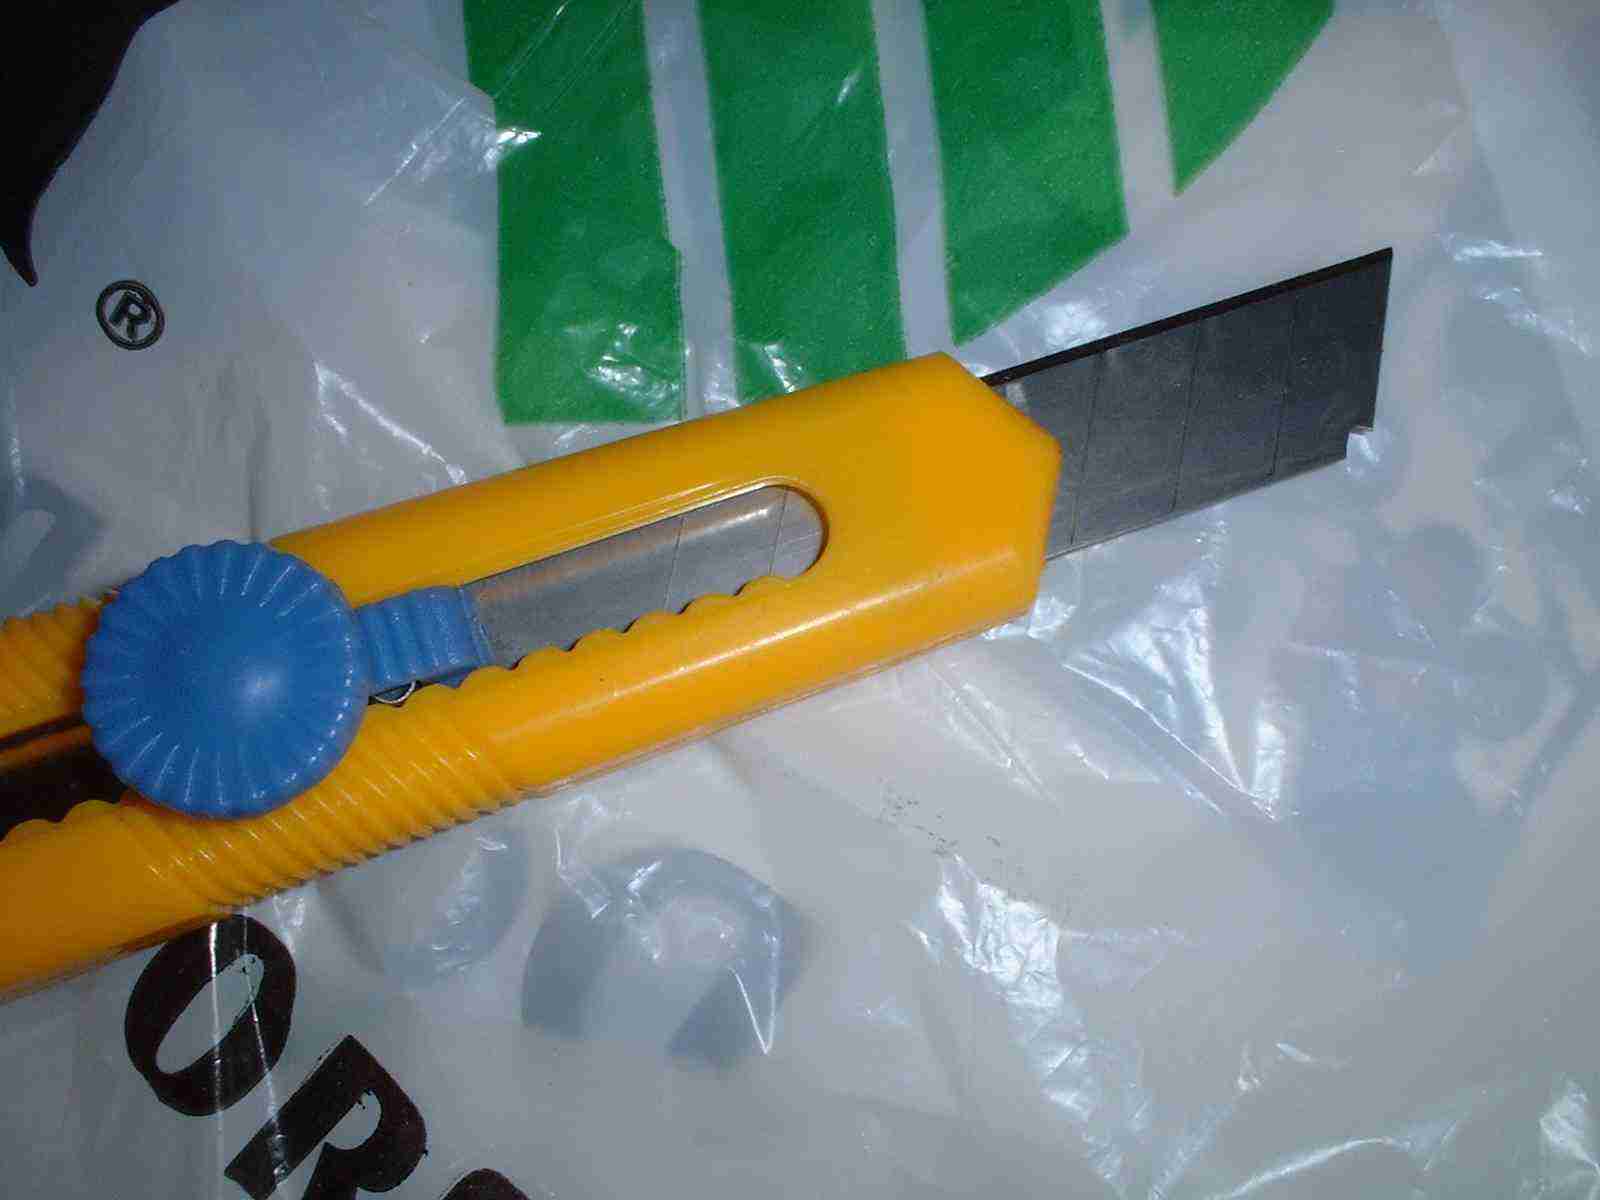 3-in-1 Tool with its box cutting blade extended